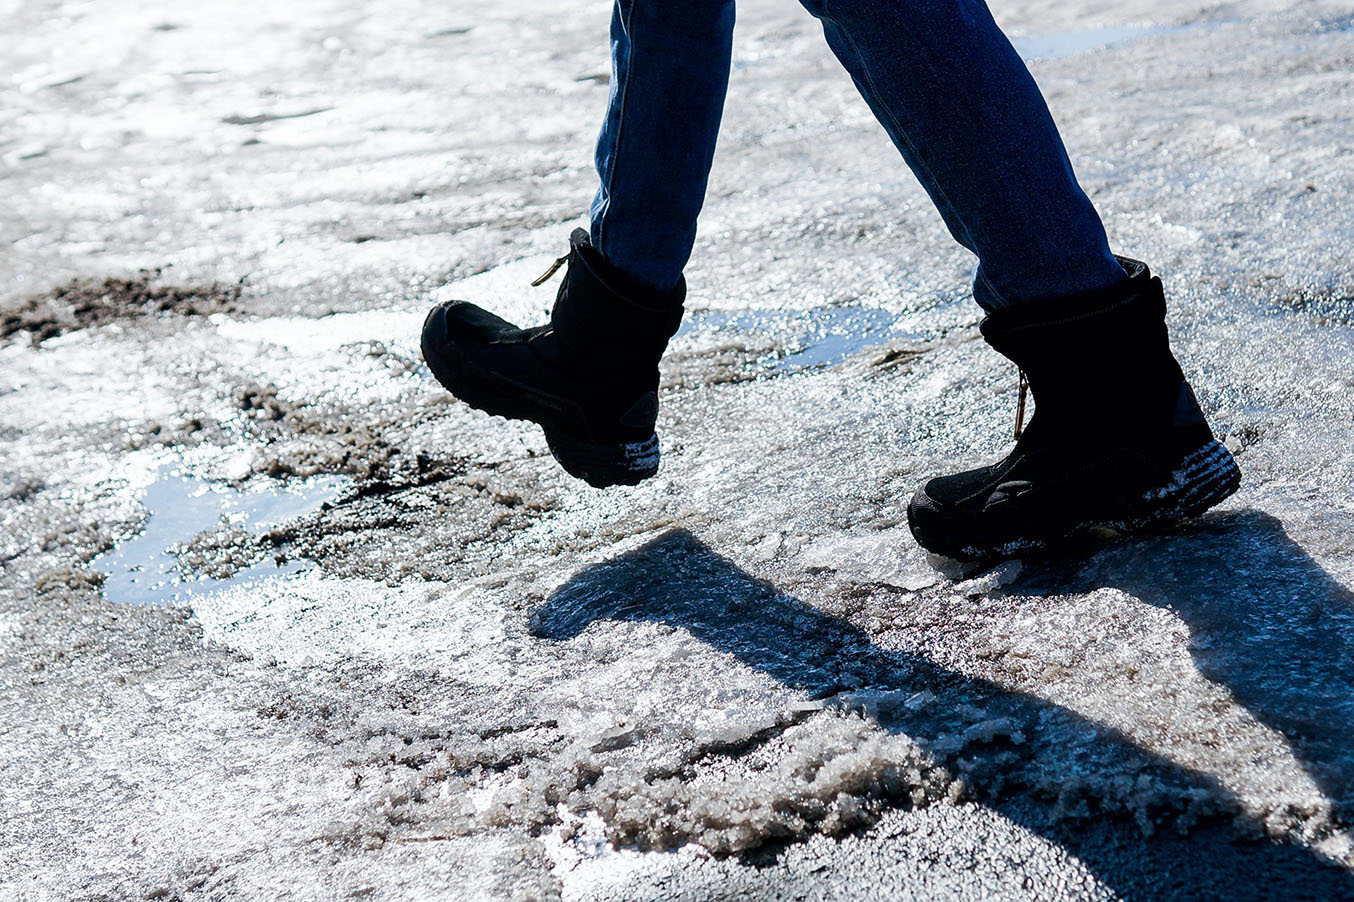 Someone walks on icy pavement wearing snow boots